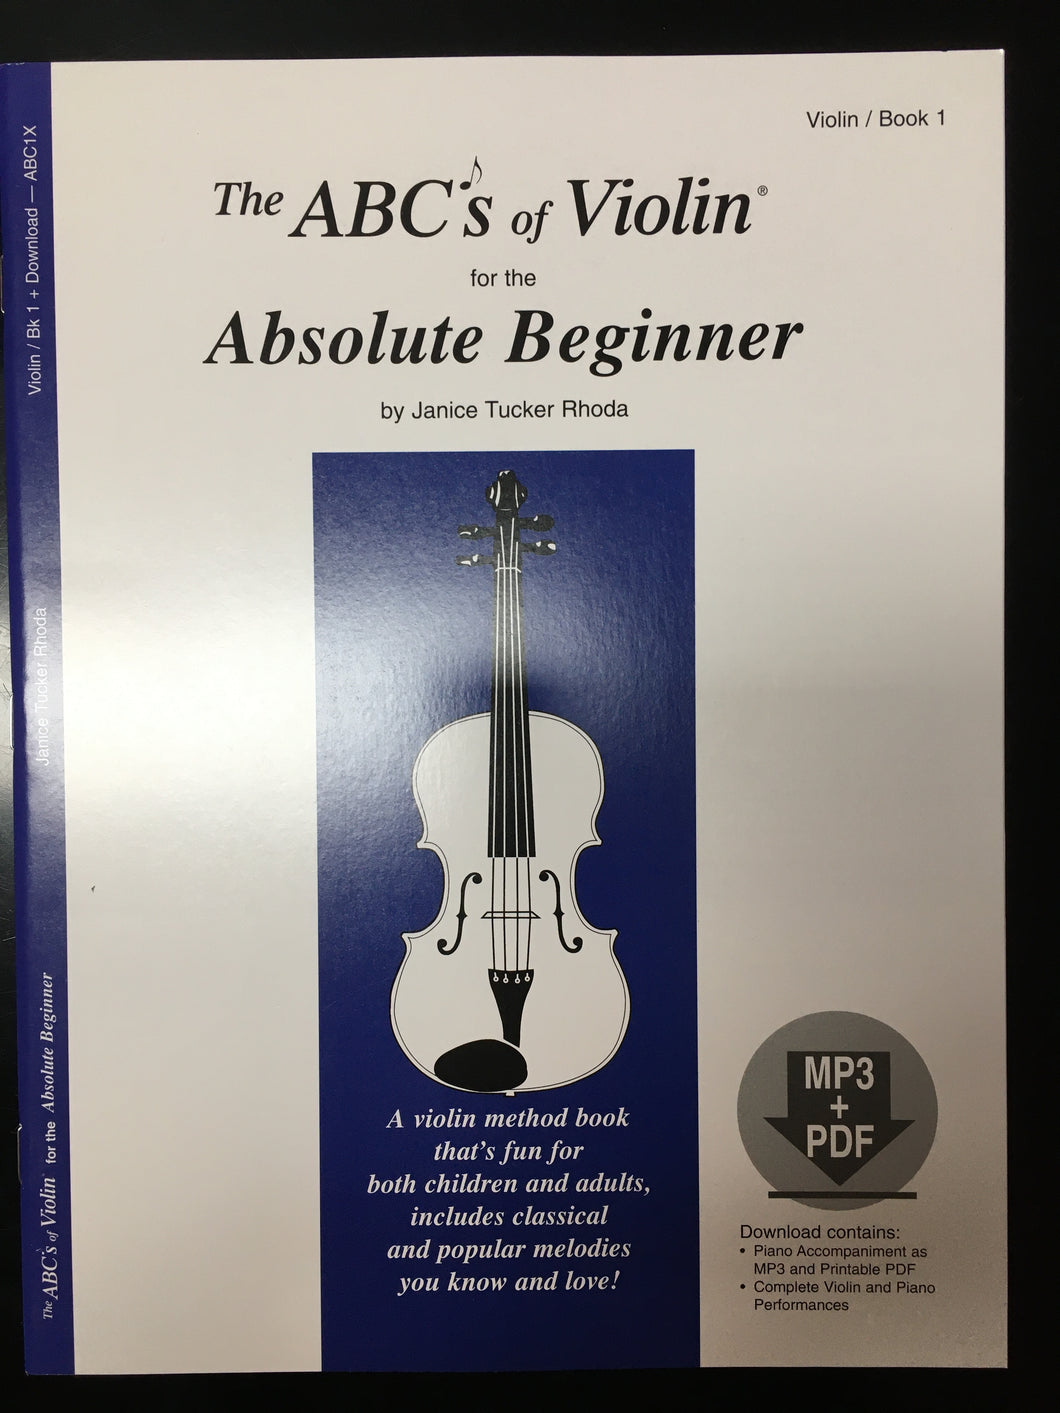 The ABCs of Violin for the Absolute Beginner Book 1